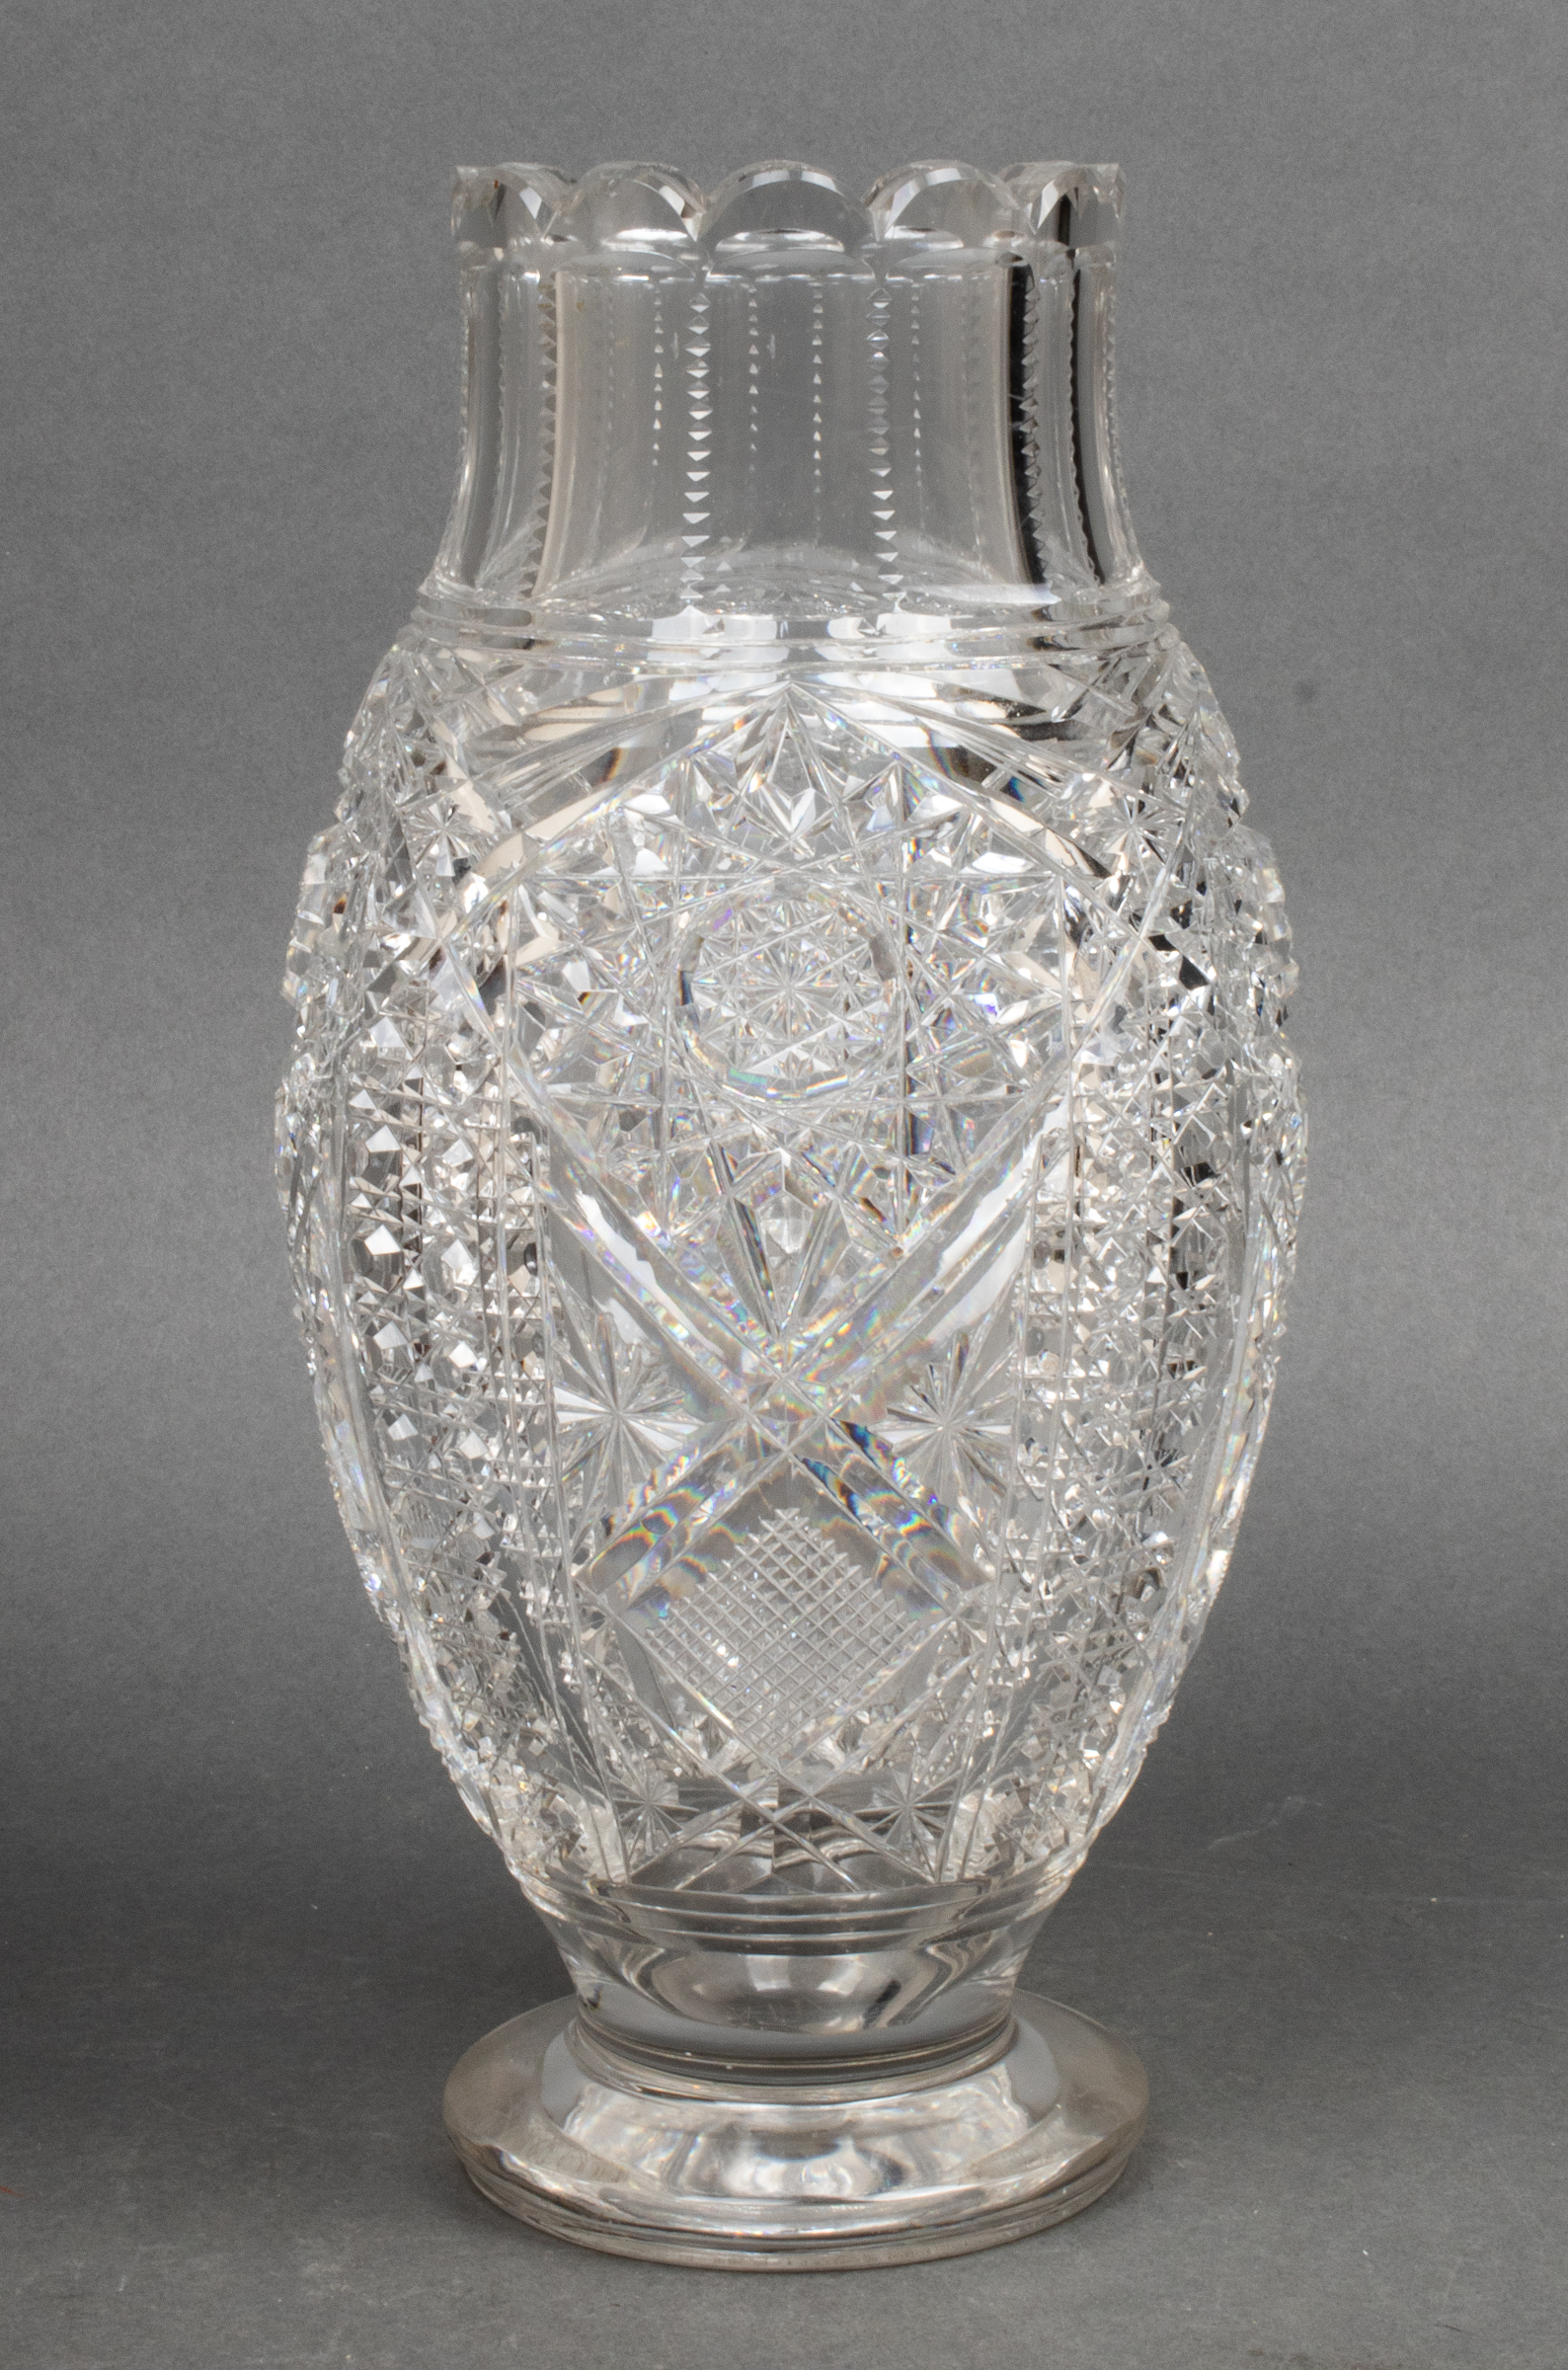 BACCARAT LARGE CUT COLORLESS CRYSTAL 3c2aea